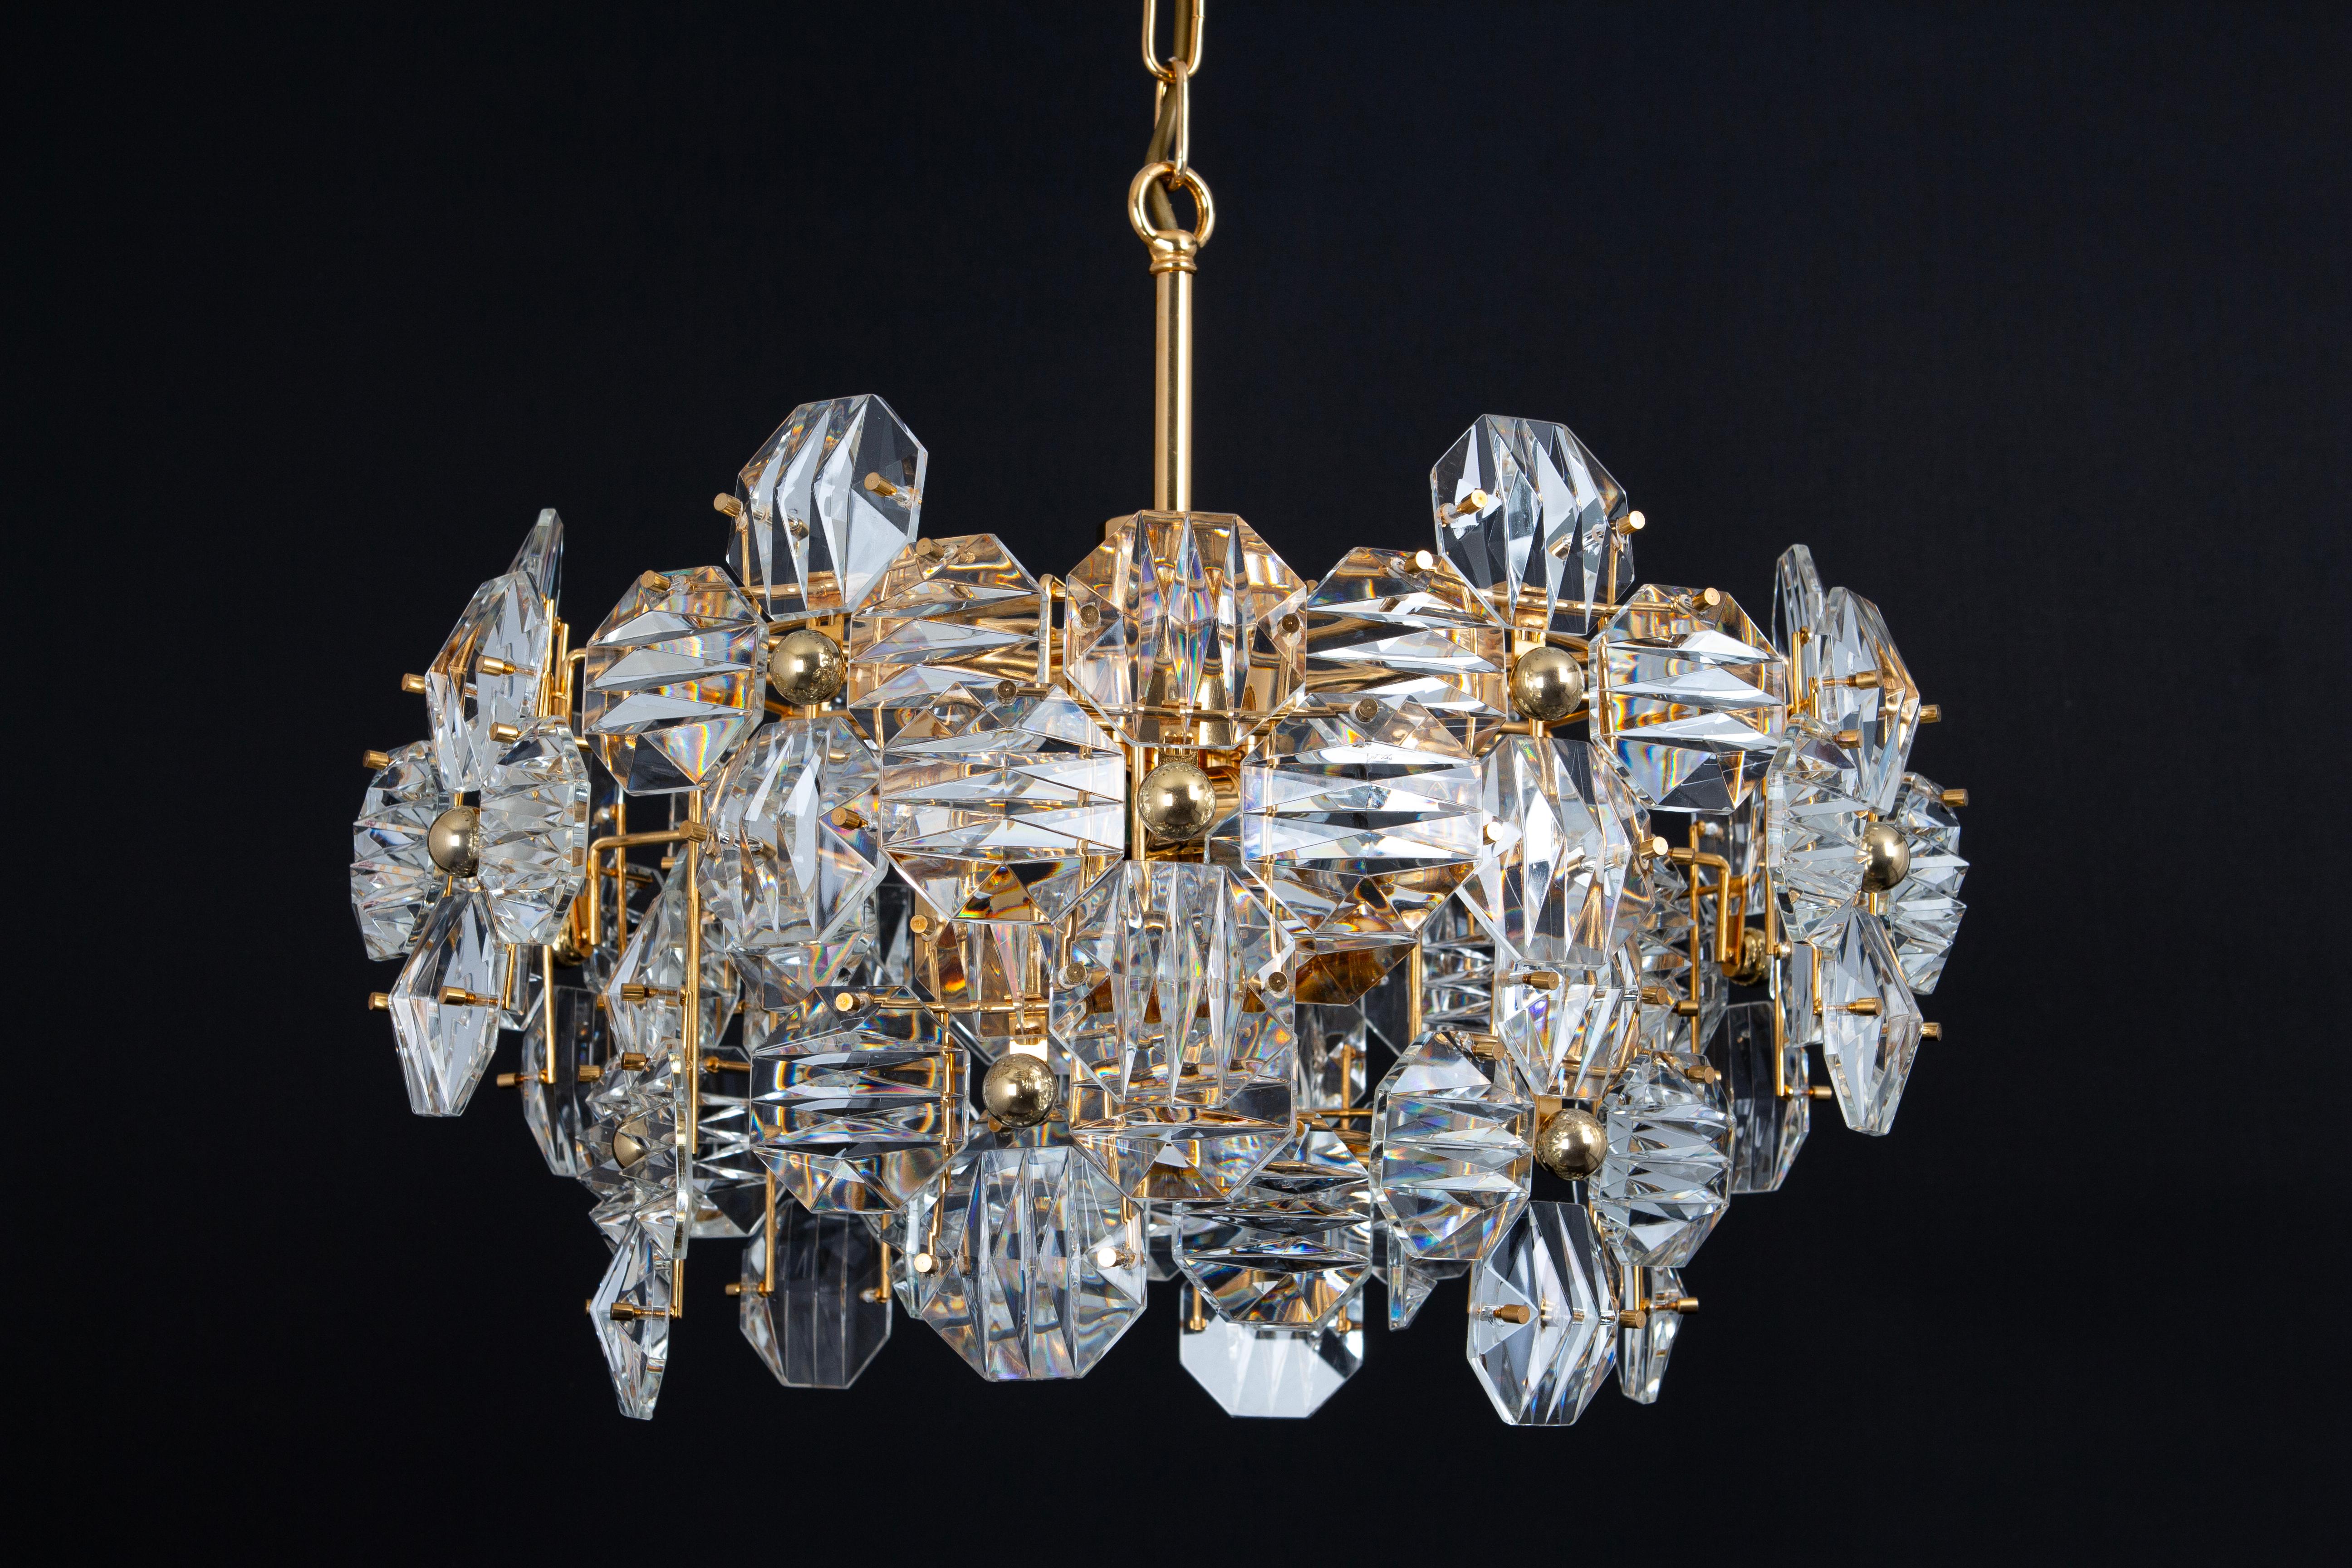 1 of 2 Stunning Chandelier, Brass and Crystal Glass by Kinkeldey, Germany, 1970s For Sale 7